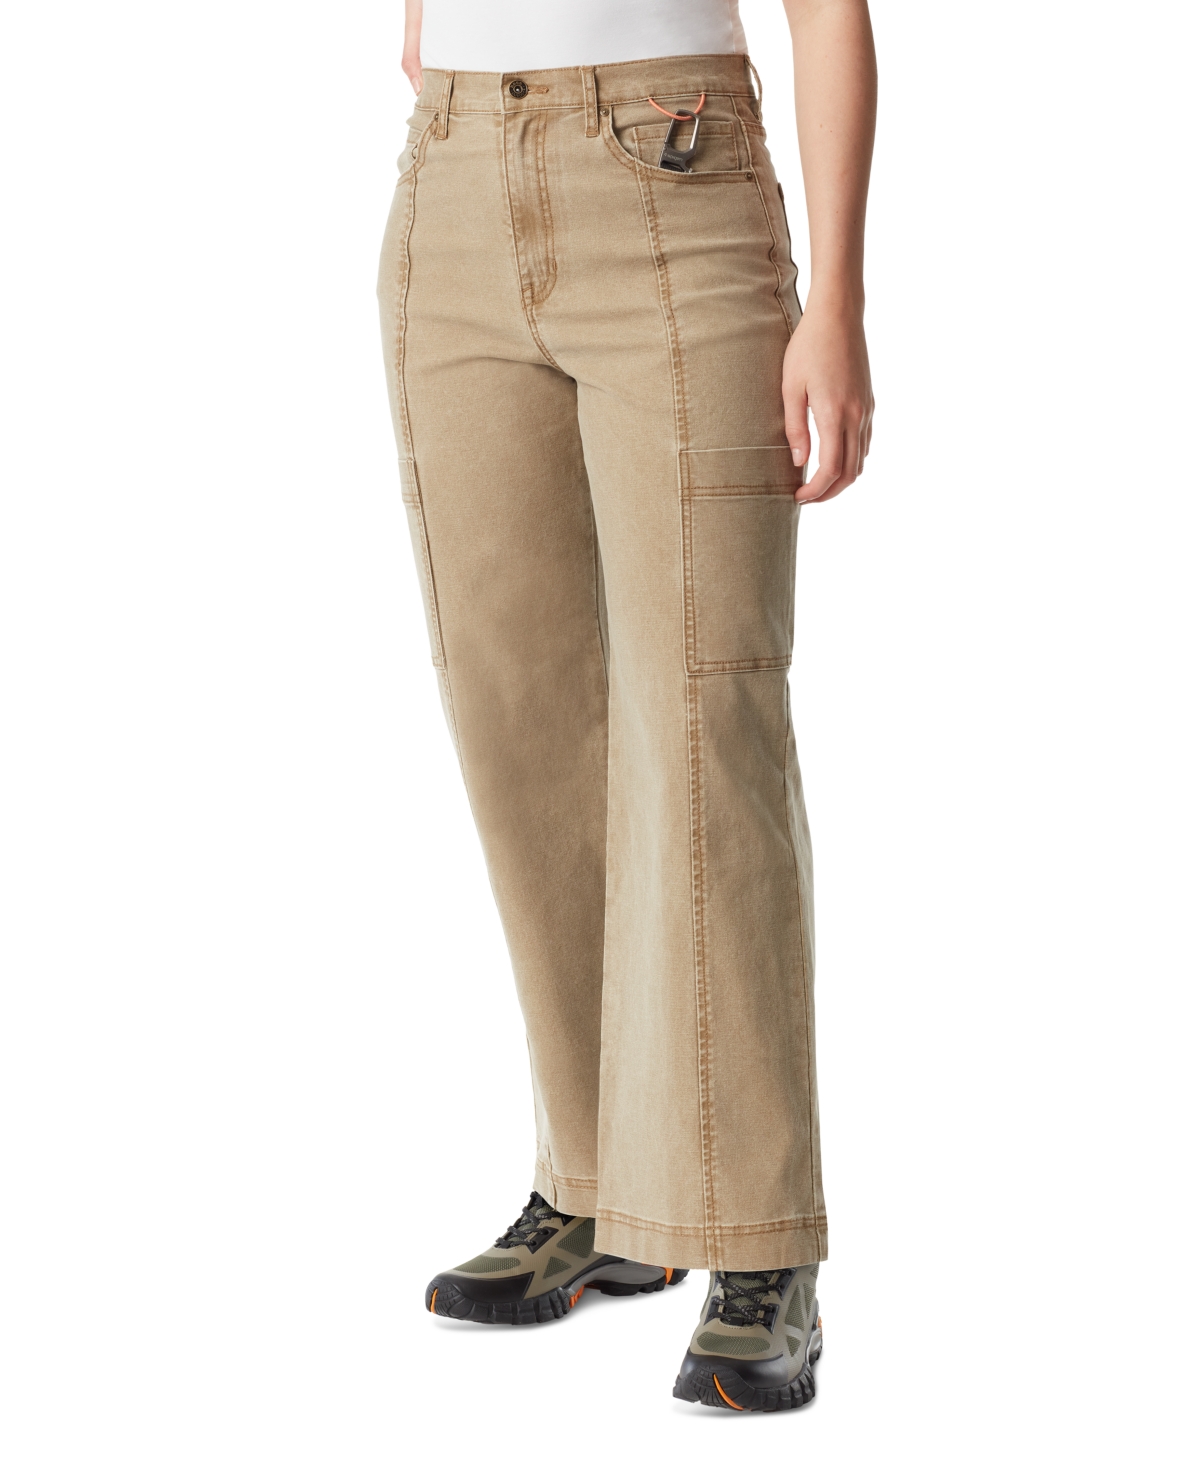 Women's High-Rise Wide-Leg Utility Pants - Forged Iron